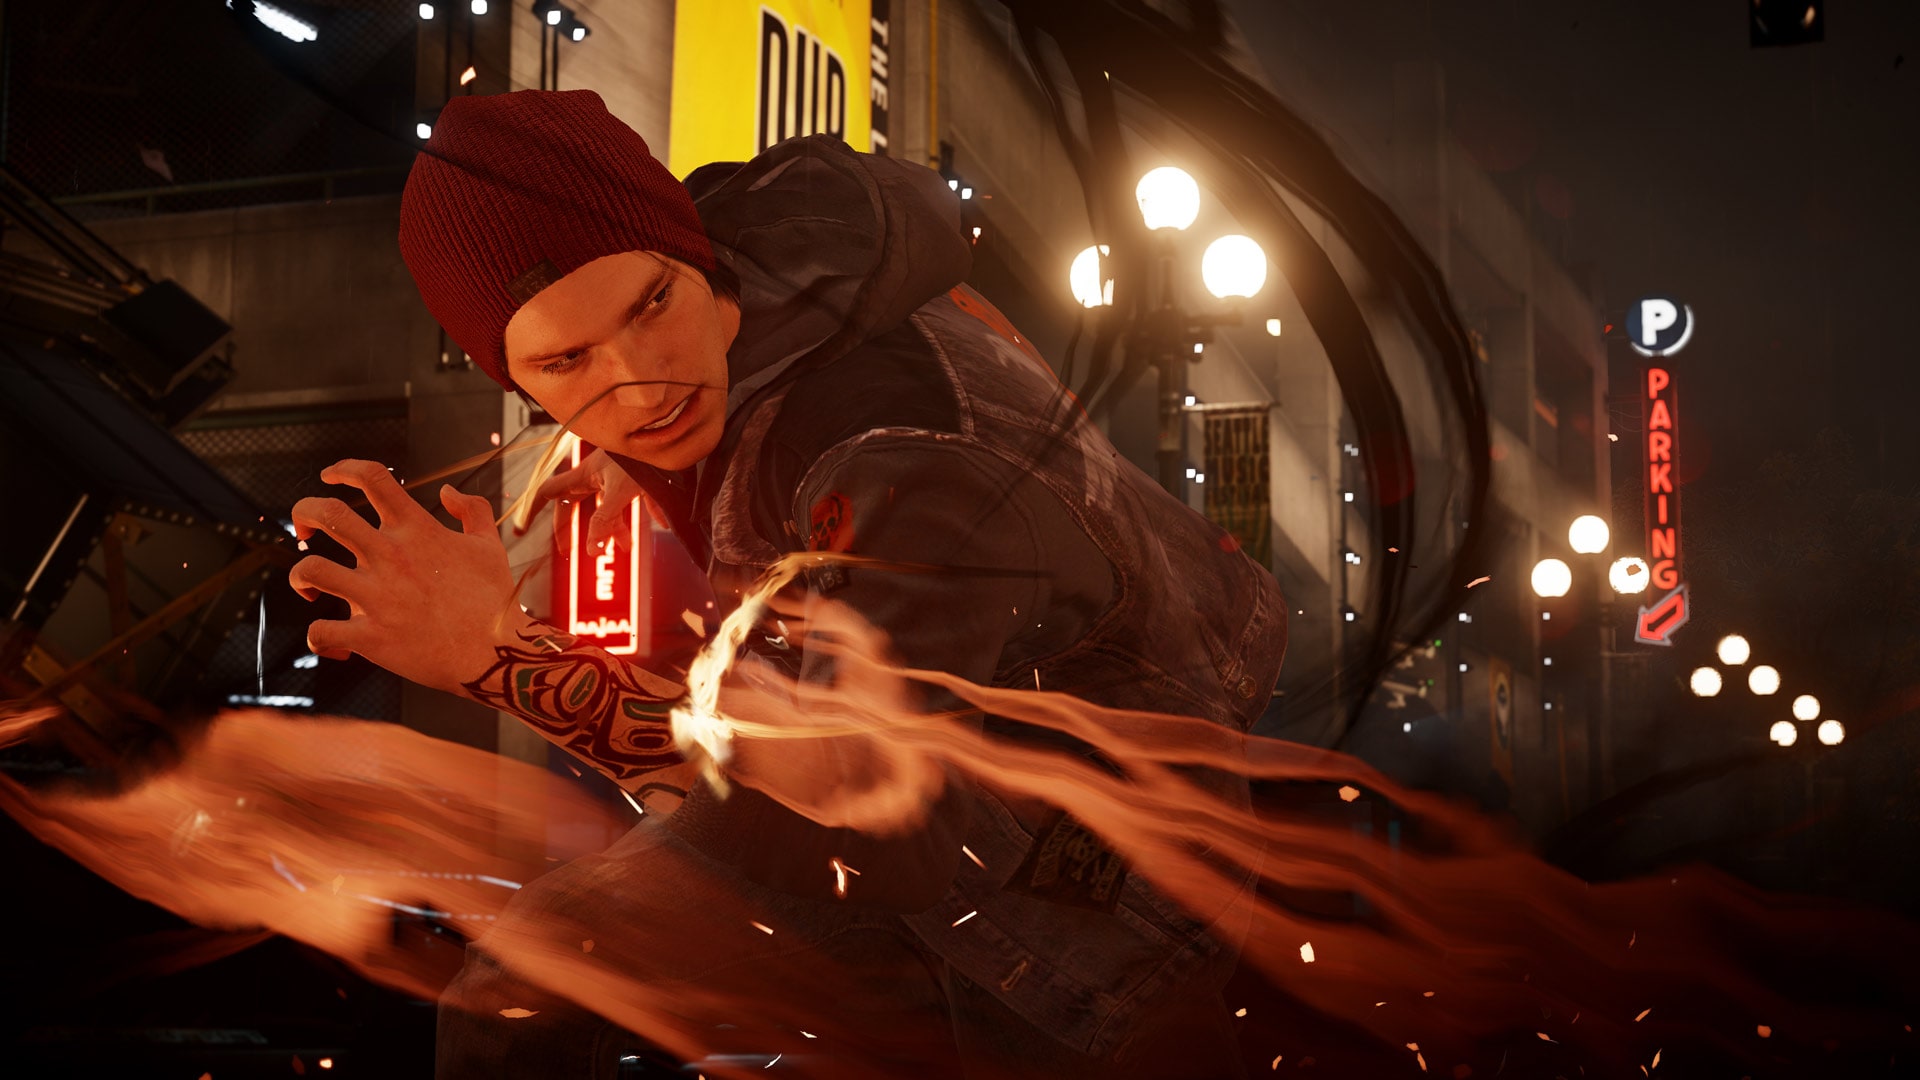 infamous second son ps4 price